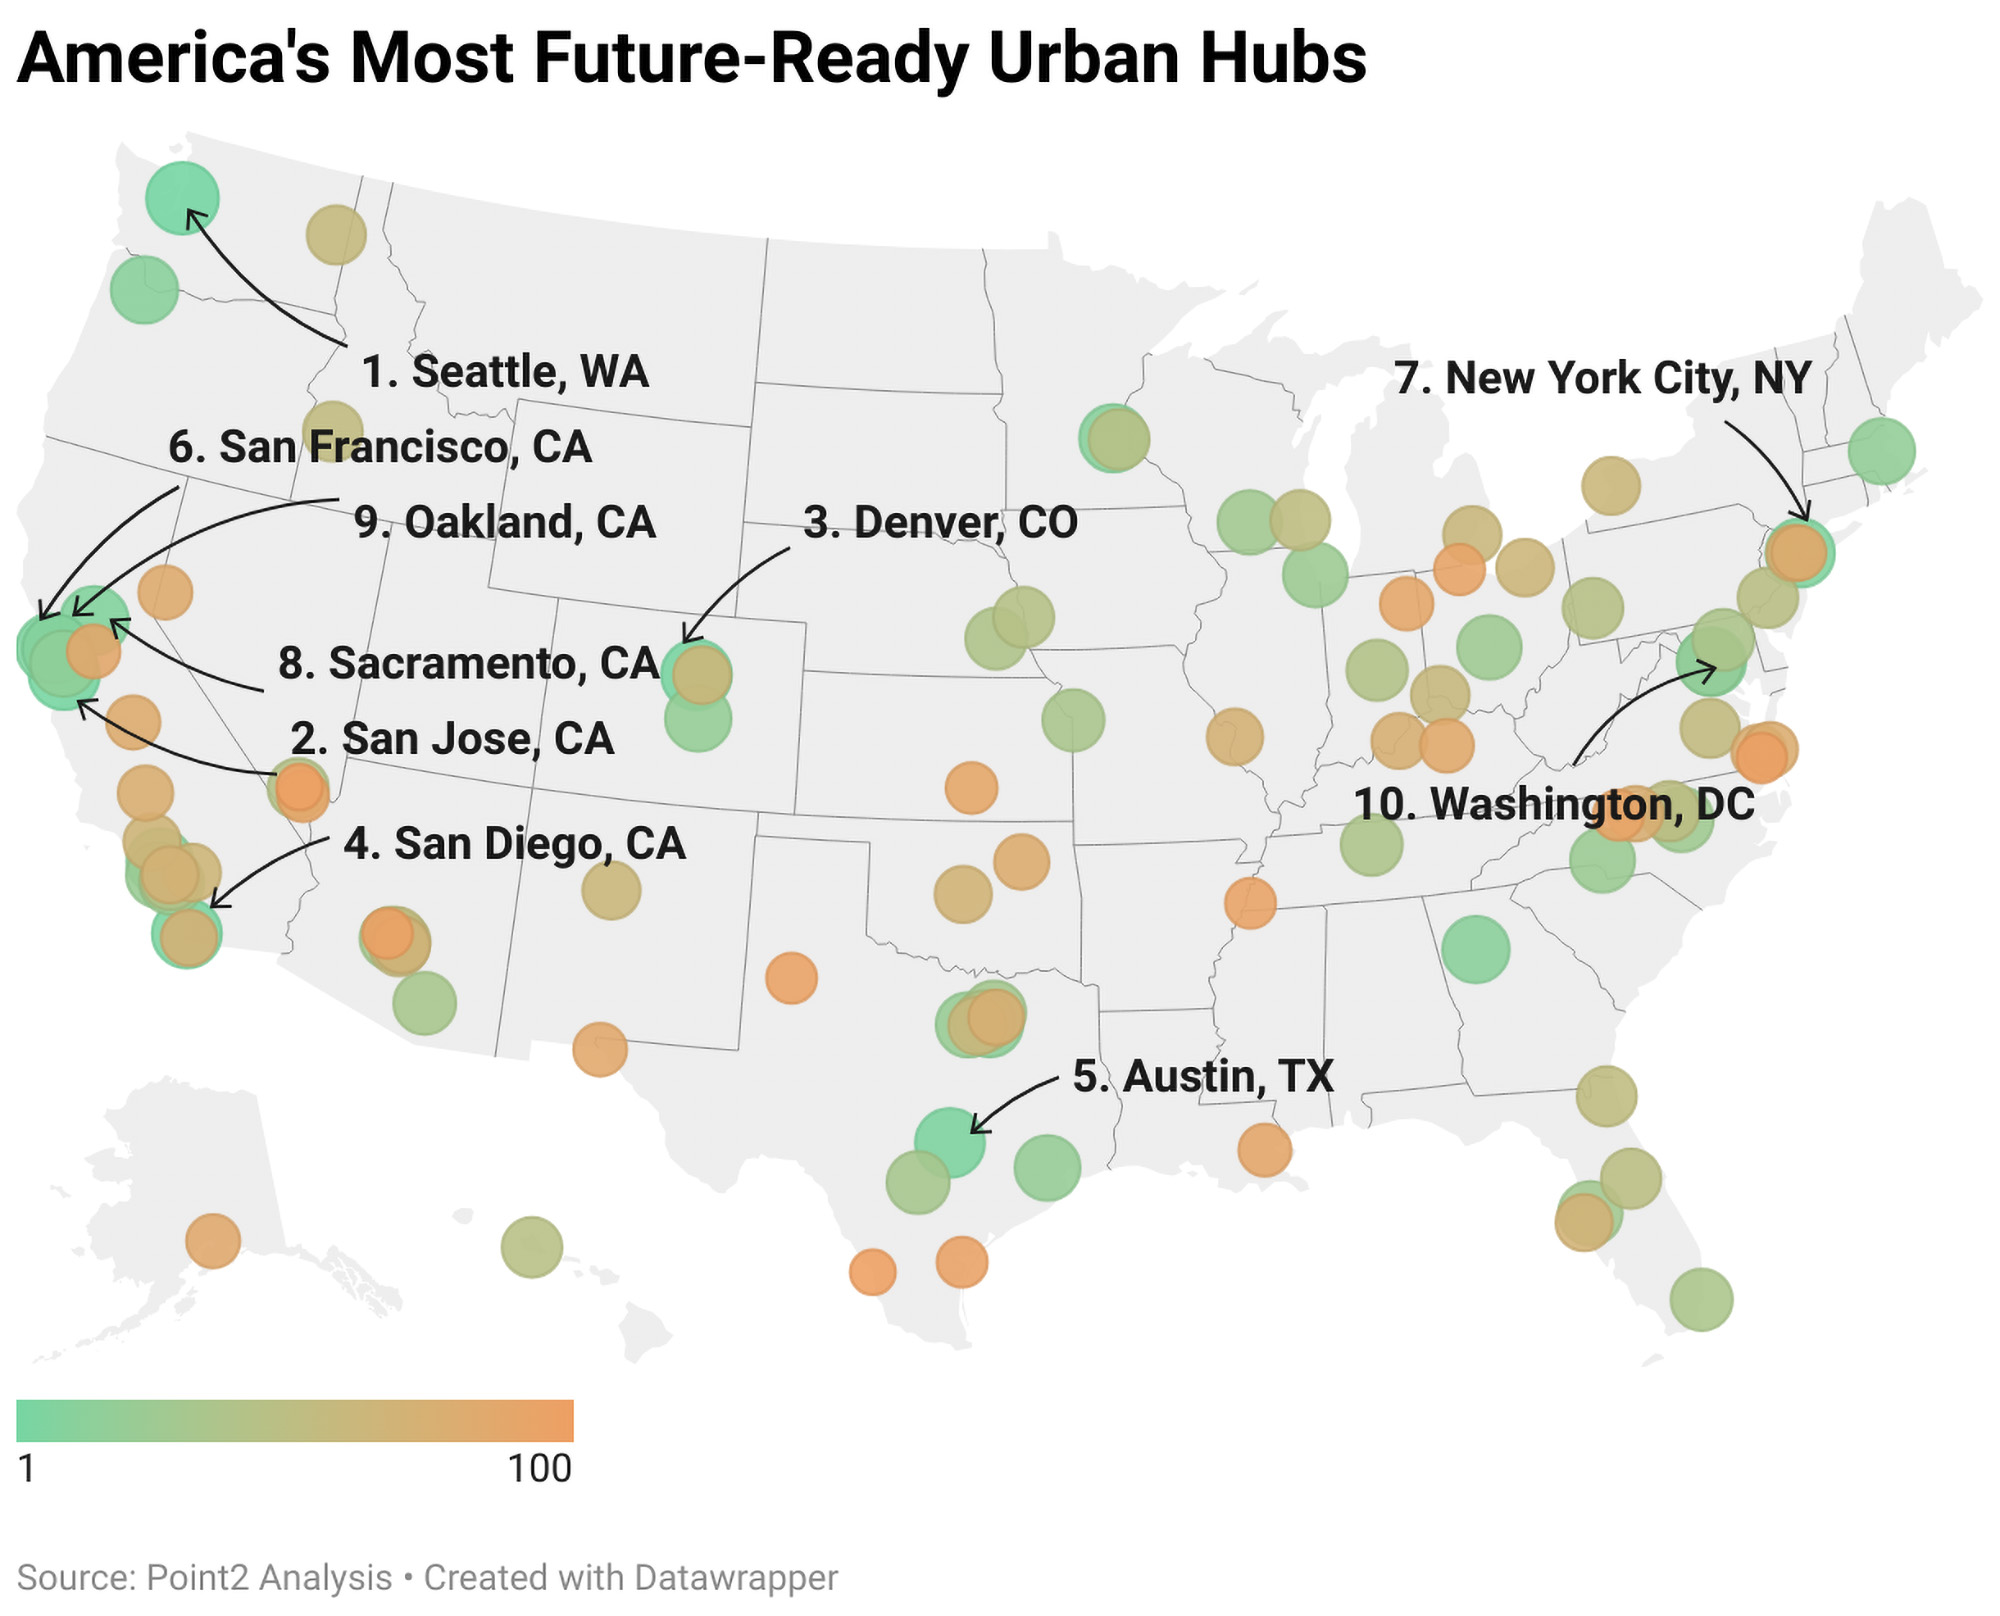 Point2 Homes analysis of America's most future-ready urban hubs